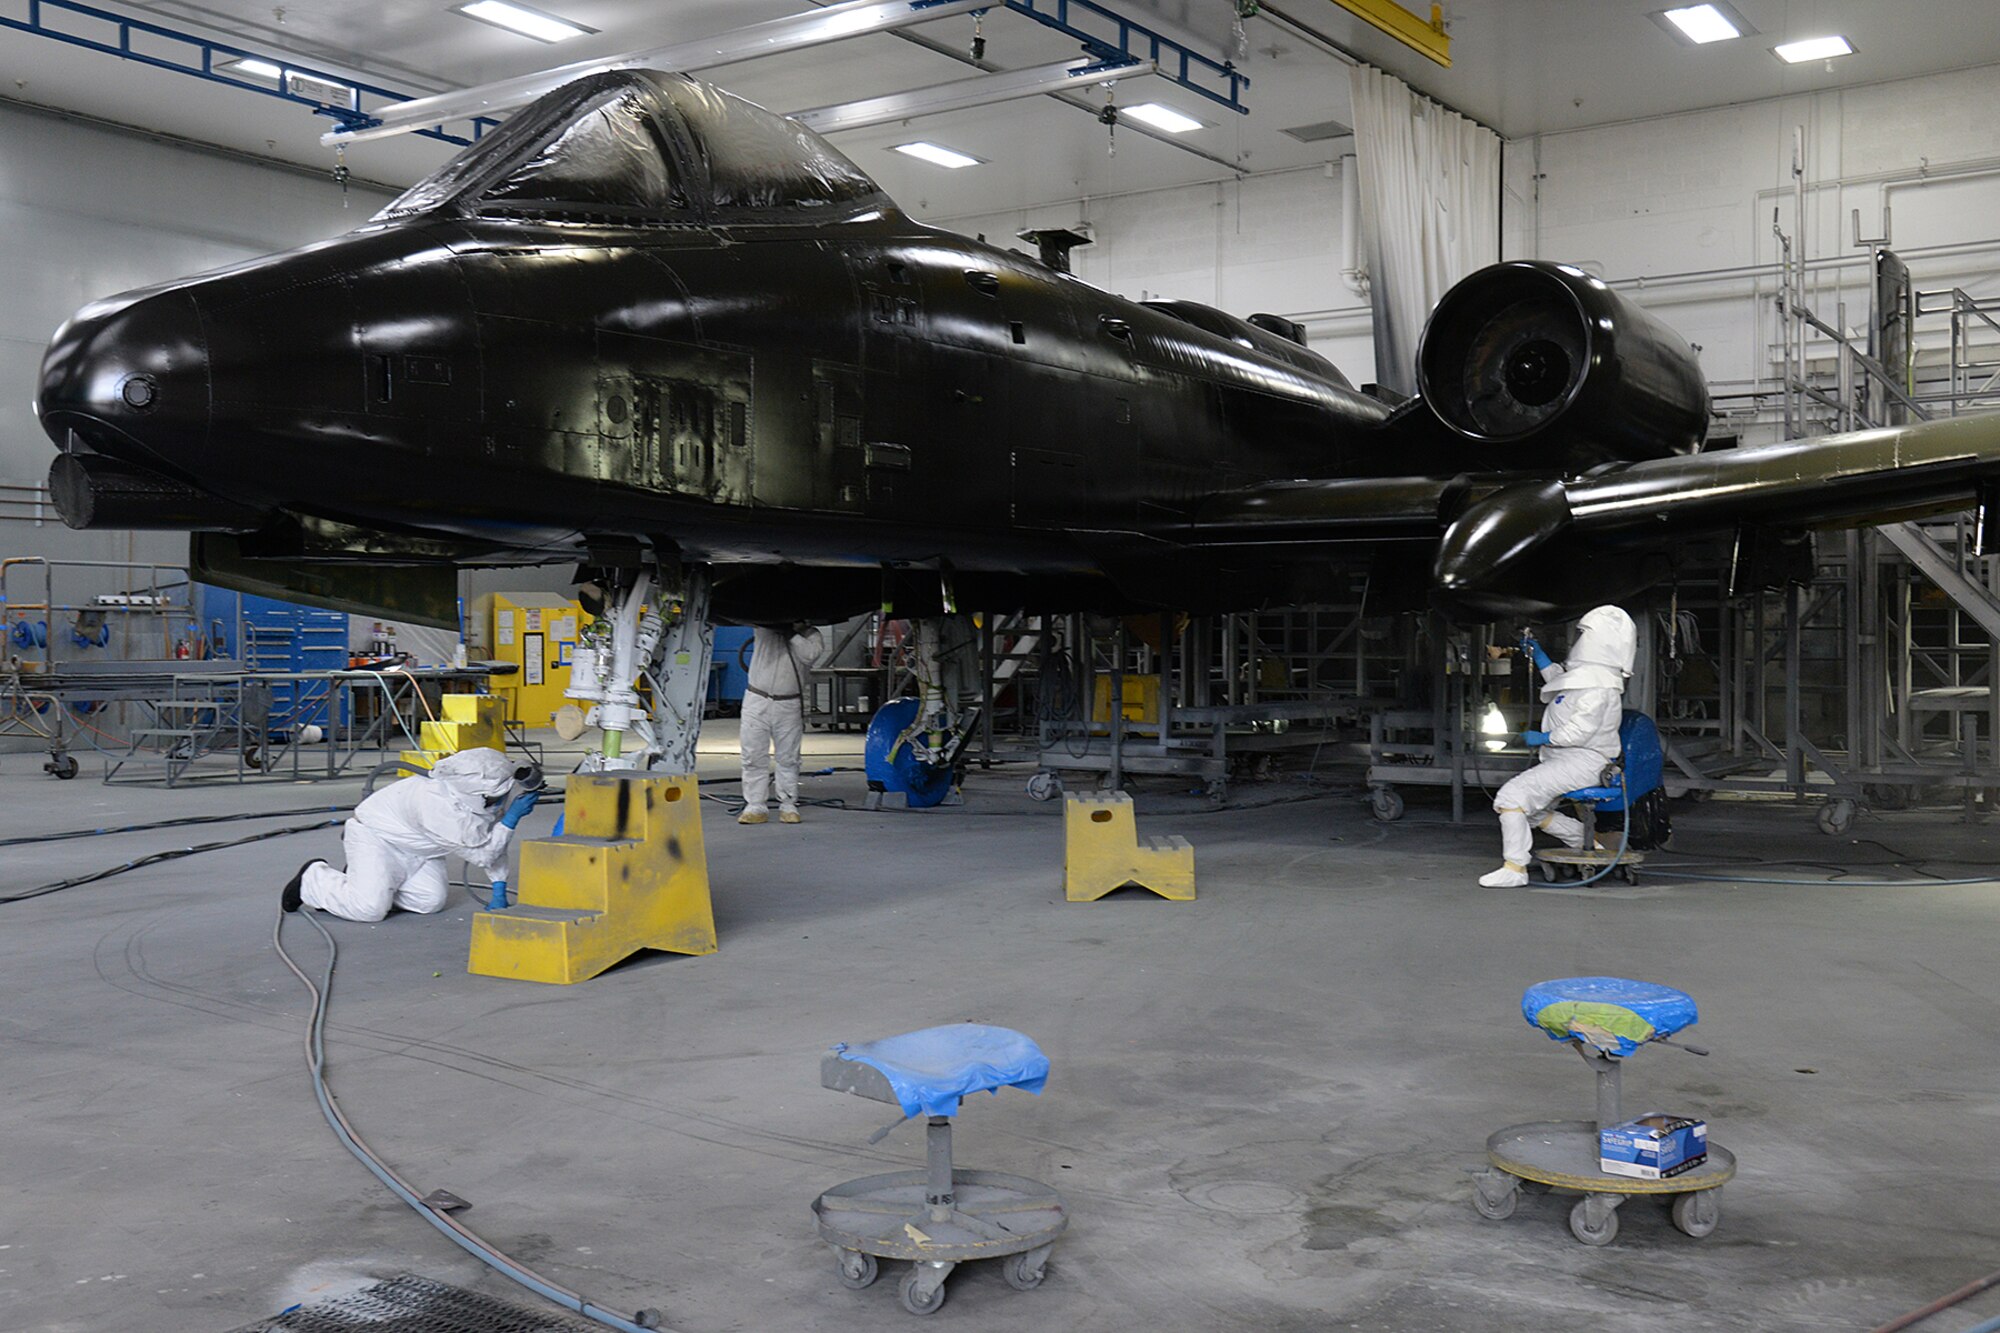 Corrosion control technicians apply primer to an A-10 Thunderbolt II